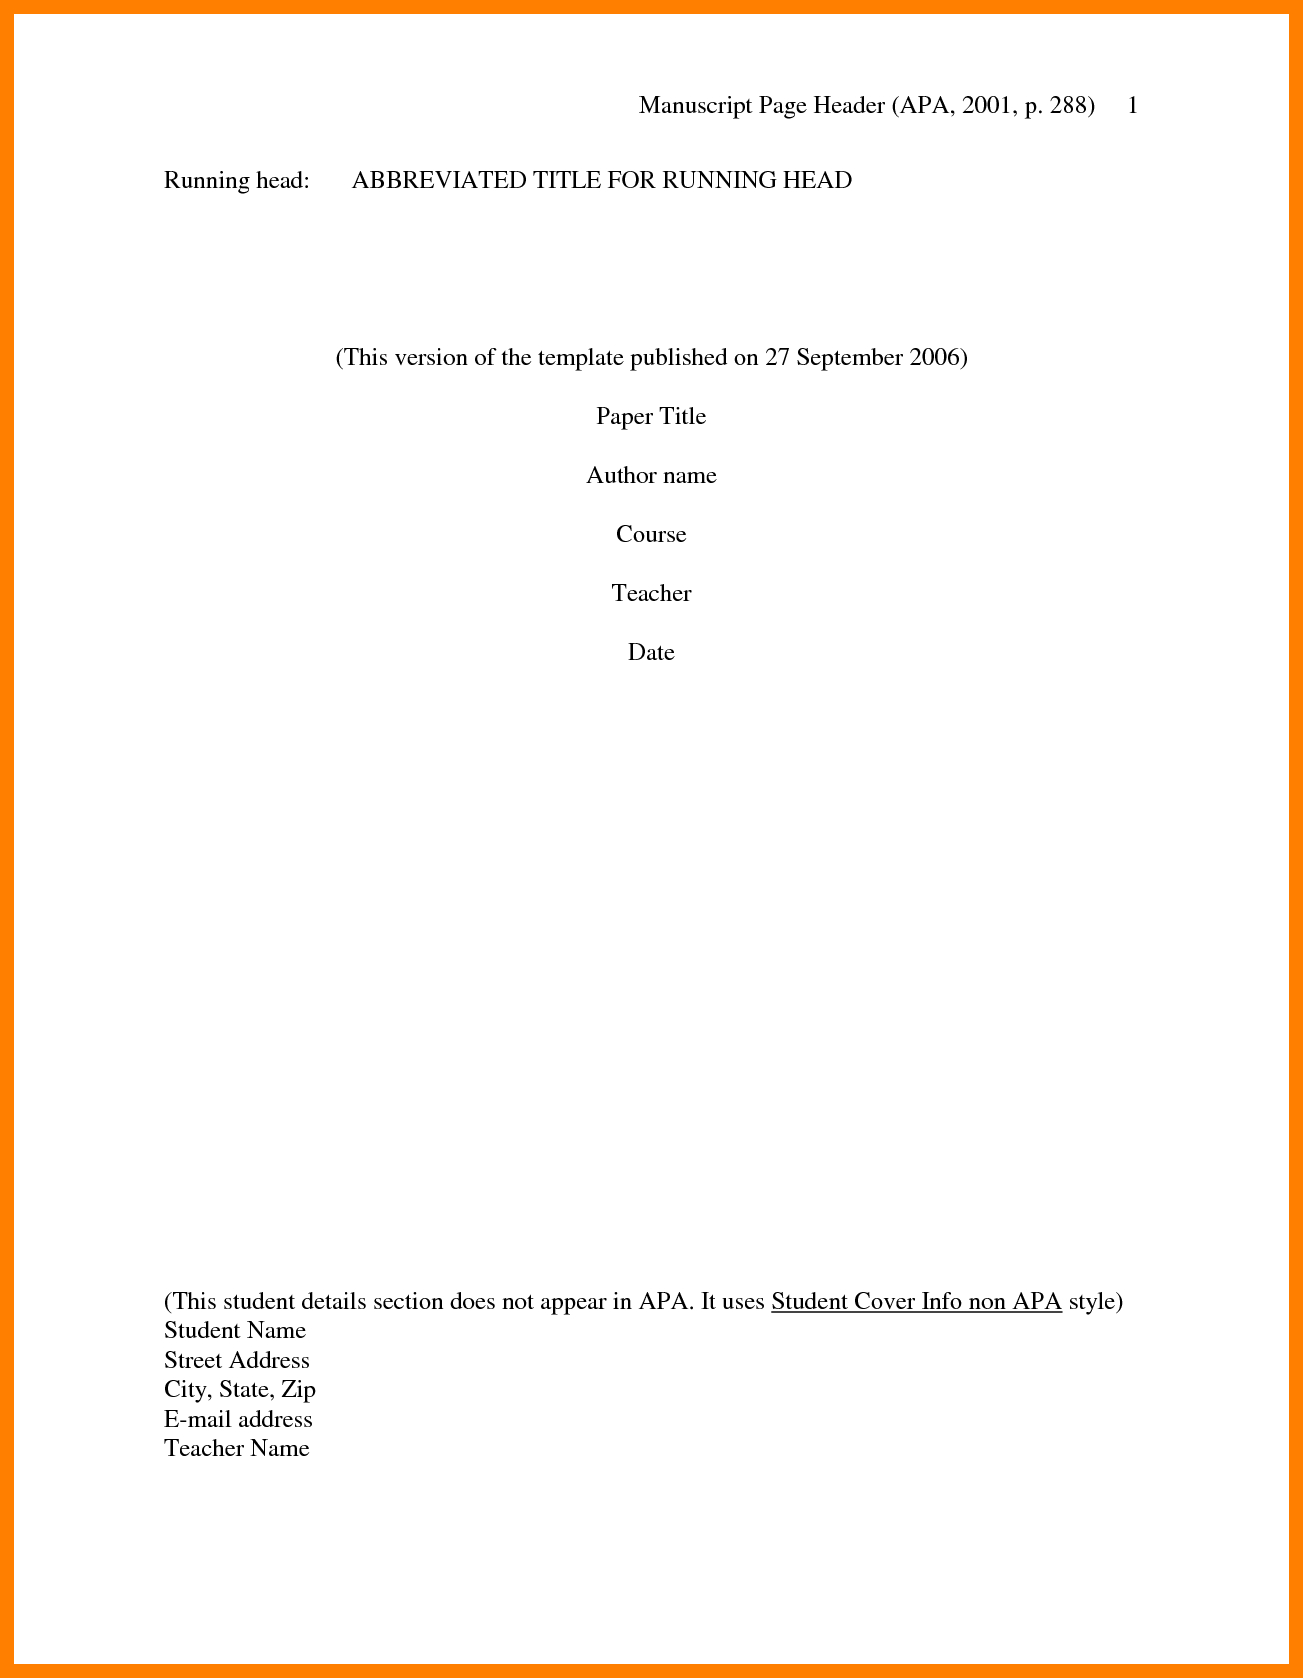 apa format cover letter apa cover letter sample image collections